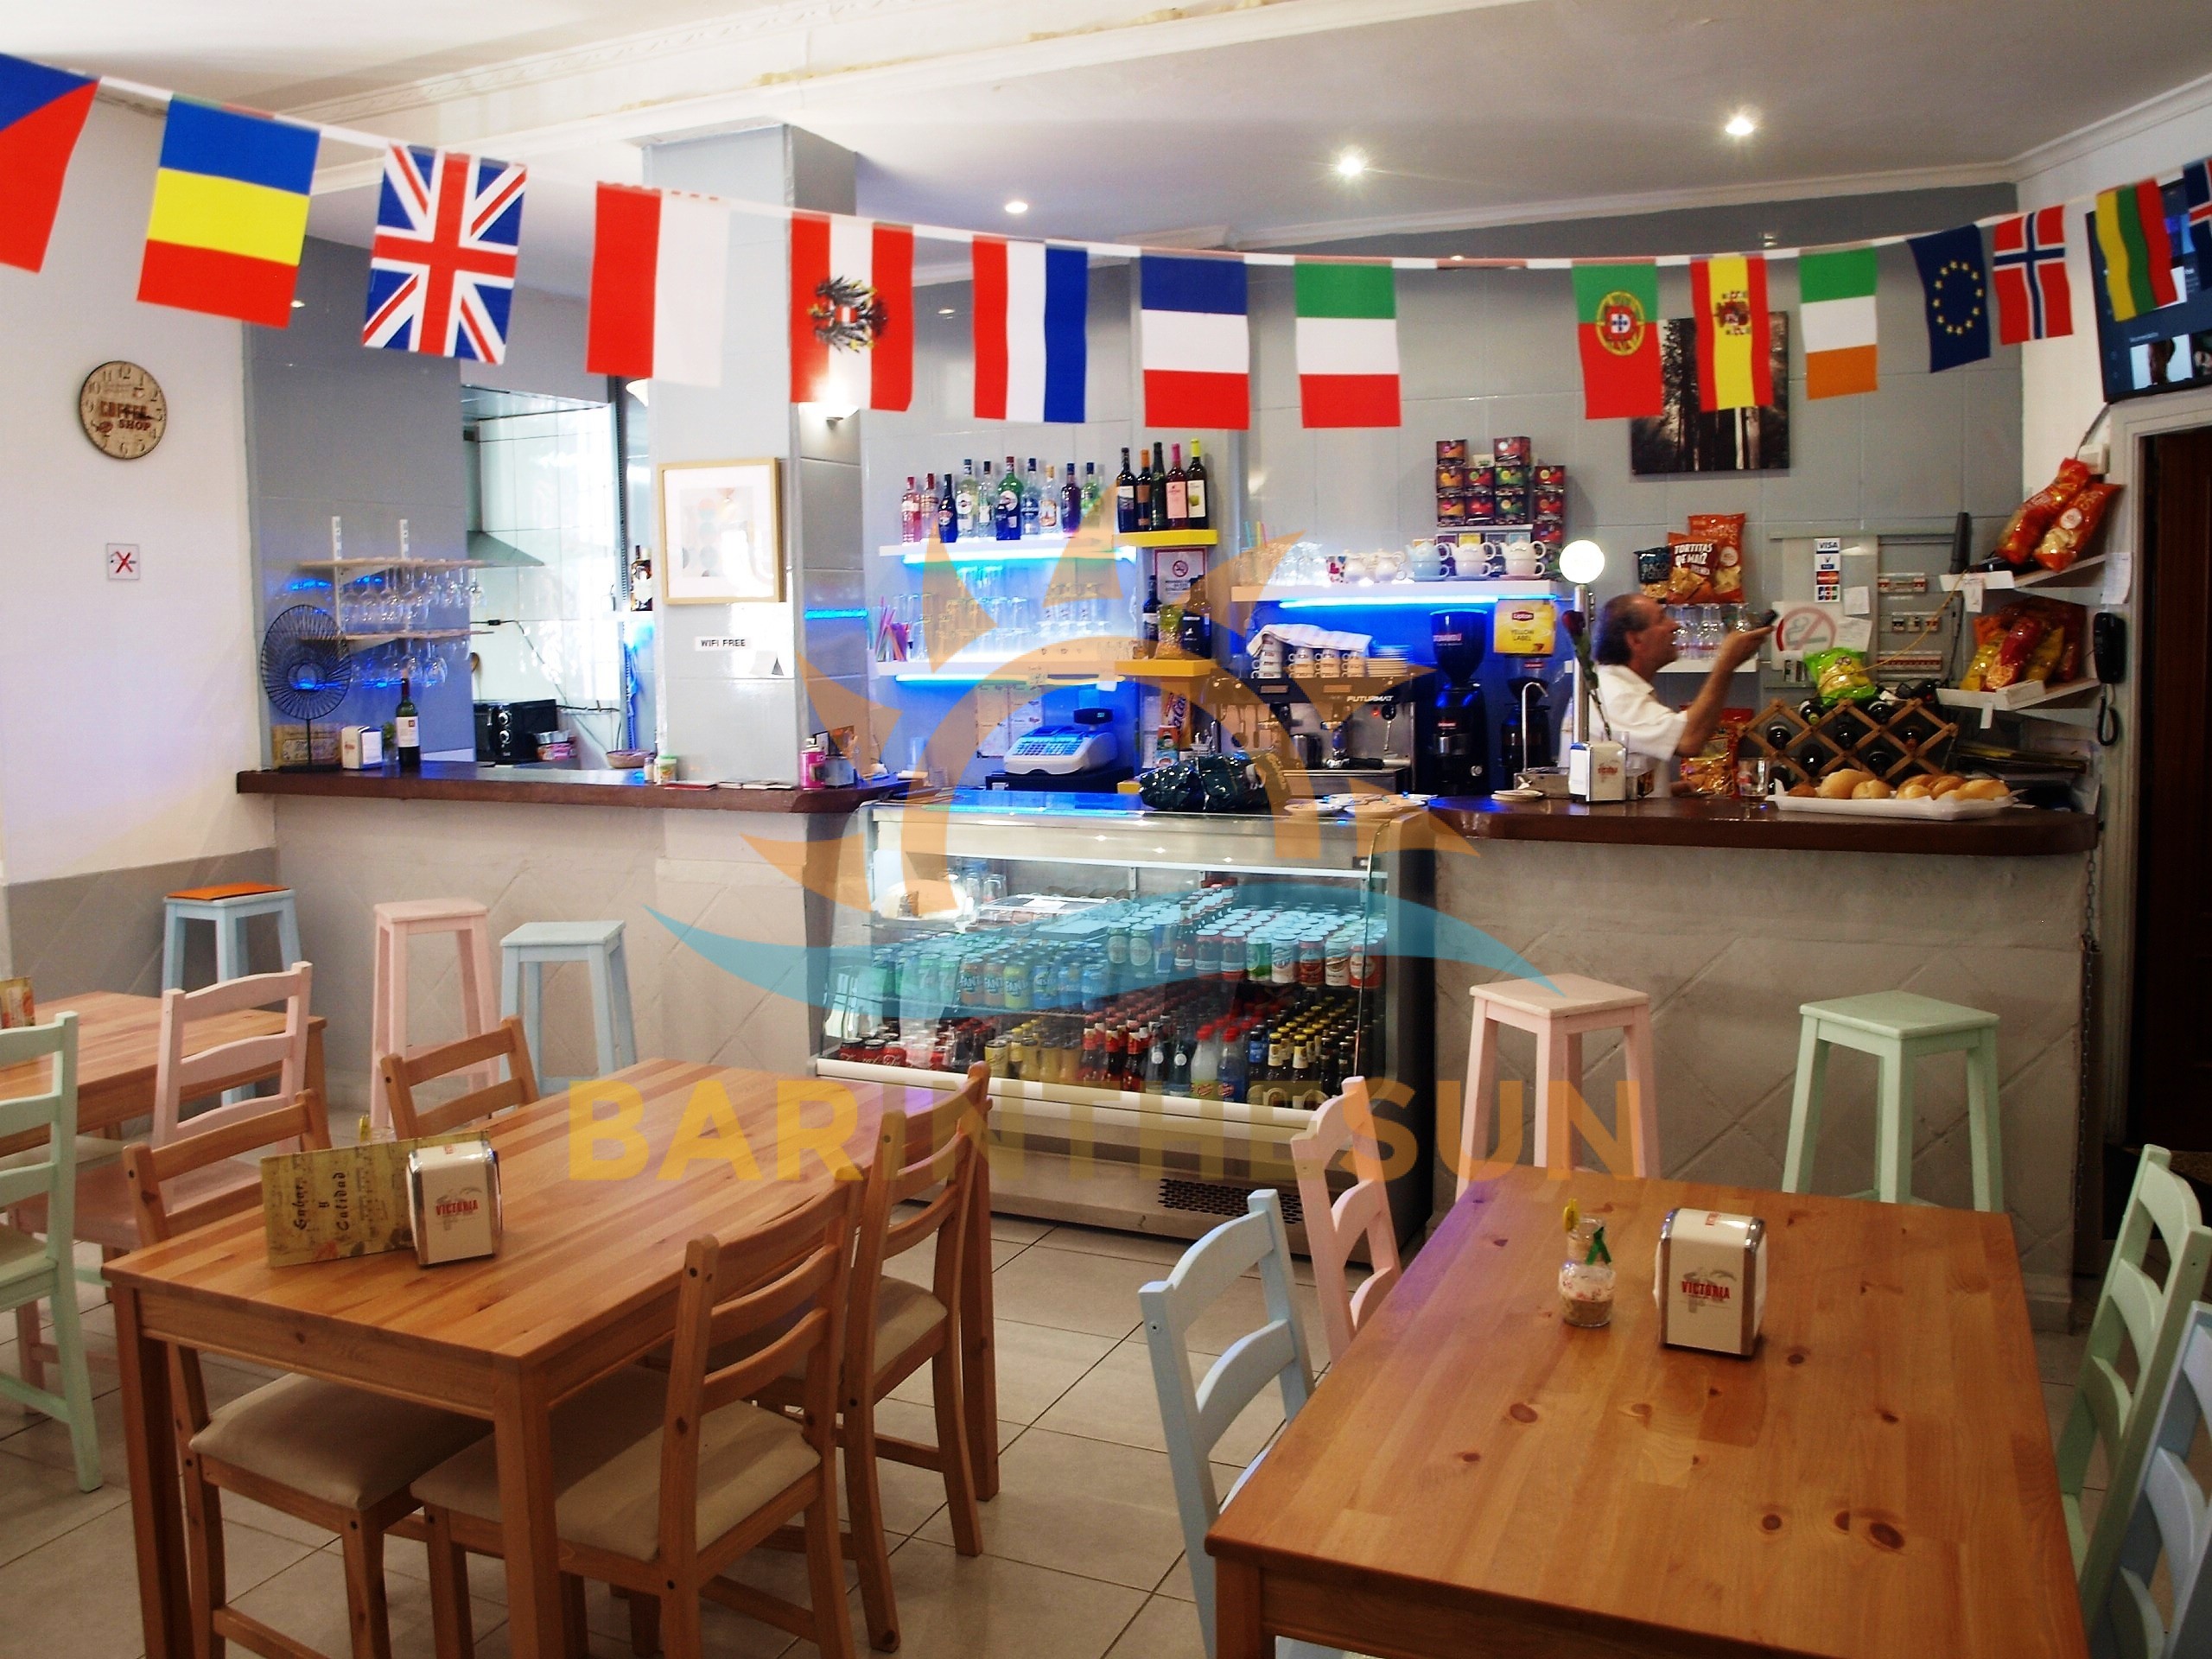 Freehold Cafe Bars For Sale in Fuengirola, Freehold Cafe Bars For Sale in Spain